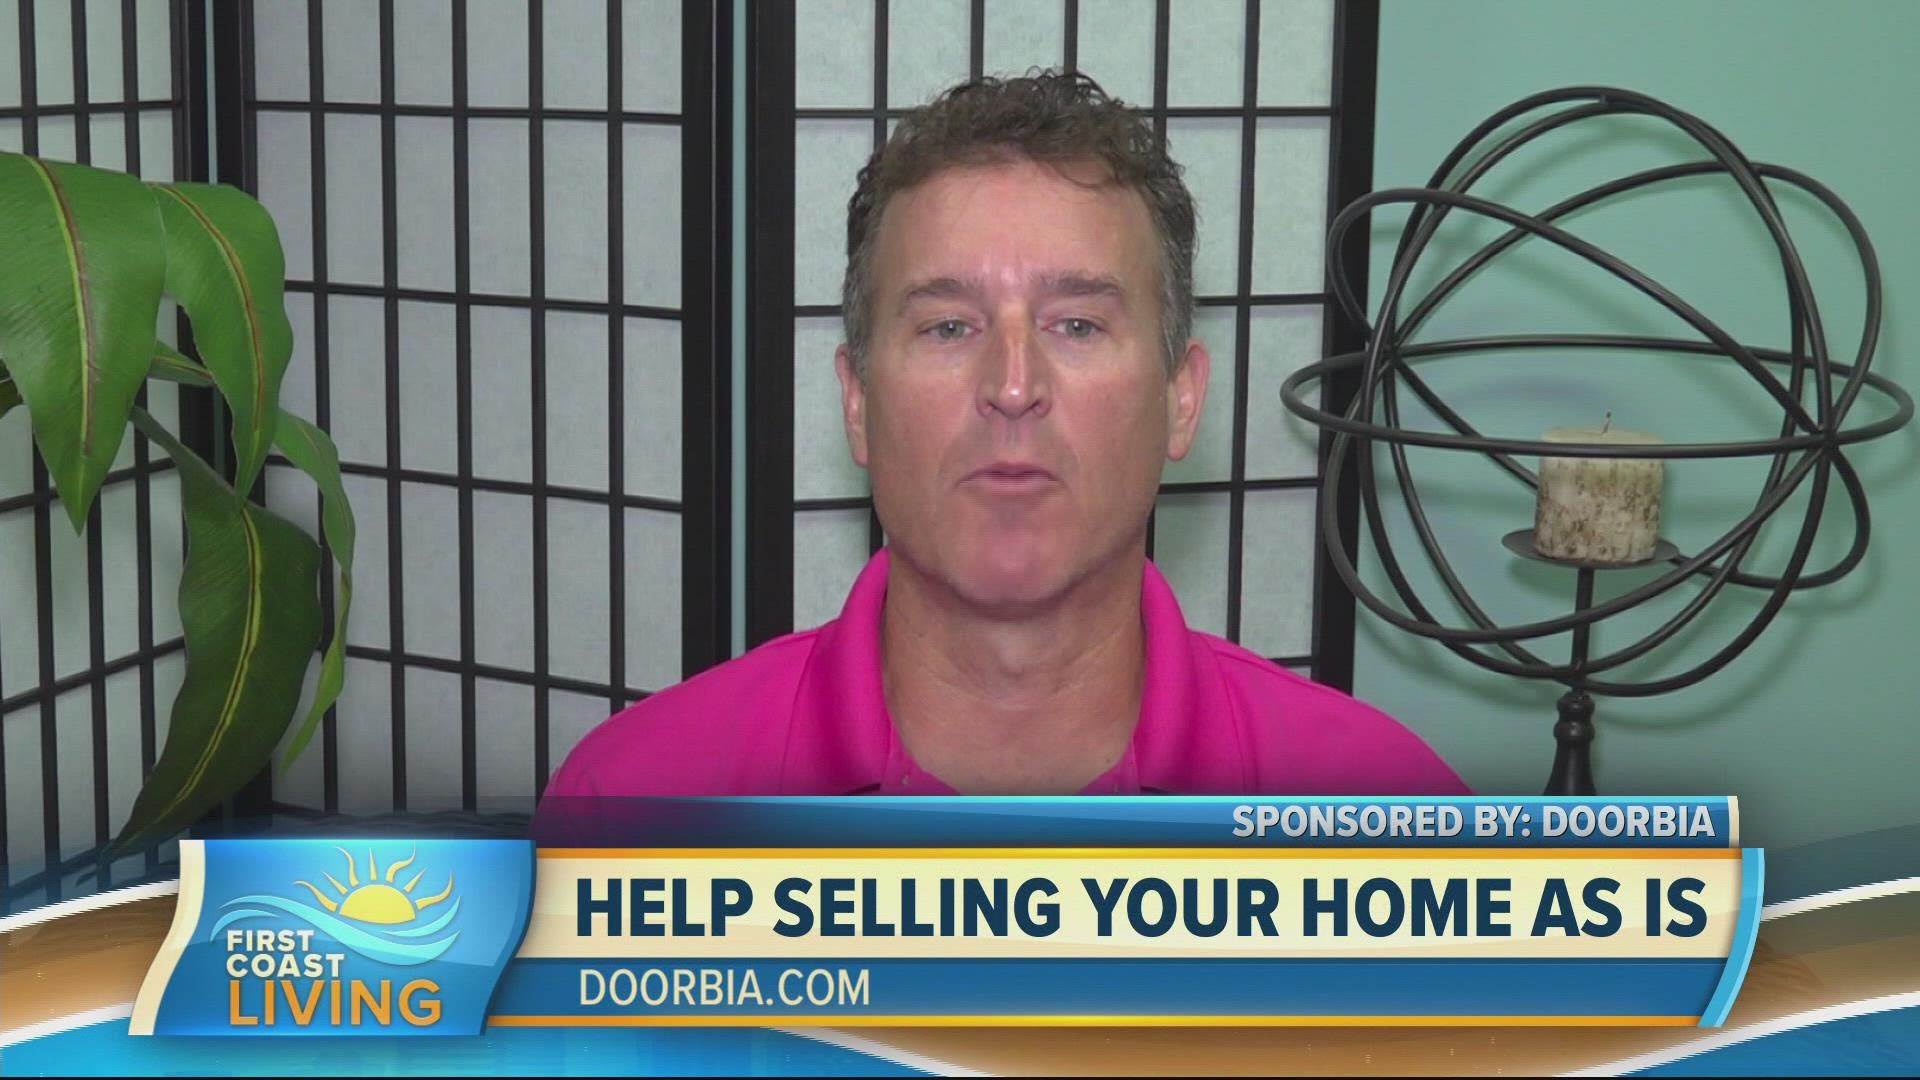 Doorbia buys houses in cash and can close in as little as 7 days.